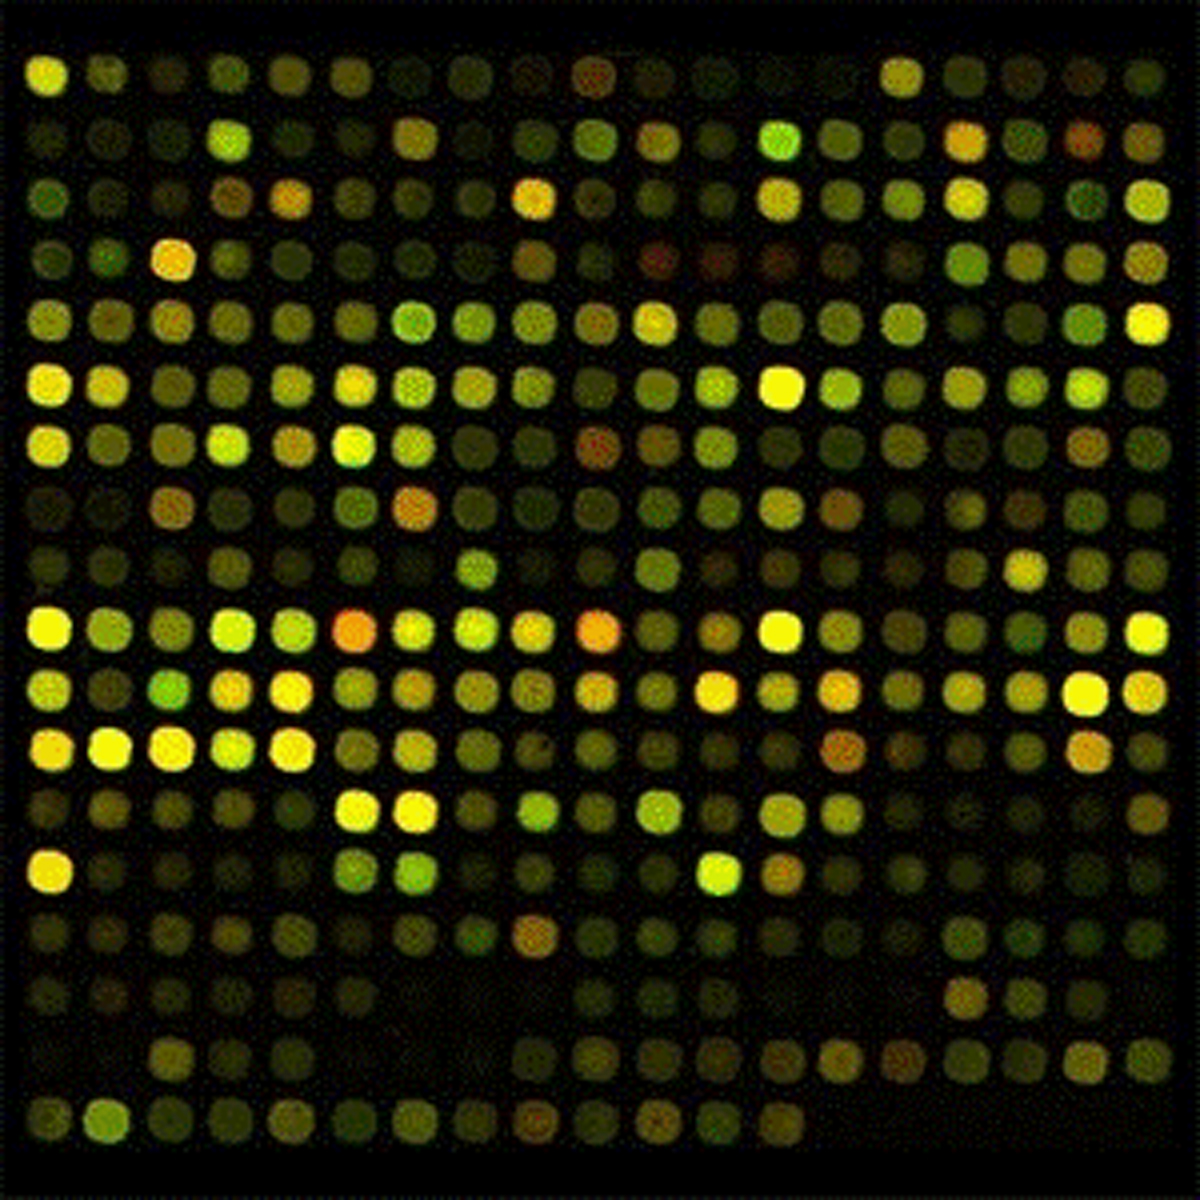 Image: Researchers used microarrays to simultaneously measure concentrations of hundreds of molecules to identify relevant microRNA expression patterns that could help noninvasively diagnose breast cancer (Photo courtesy of the University Medical Center Freiburg).